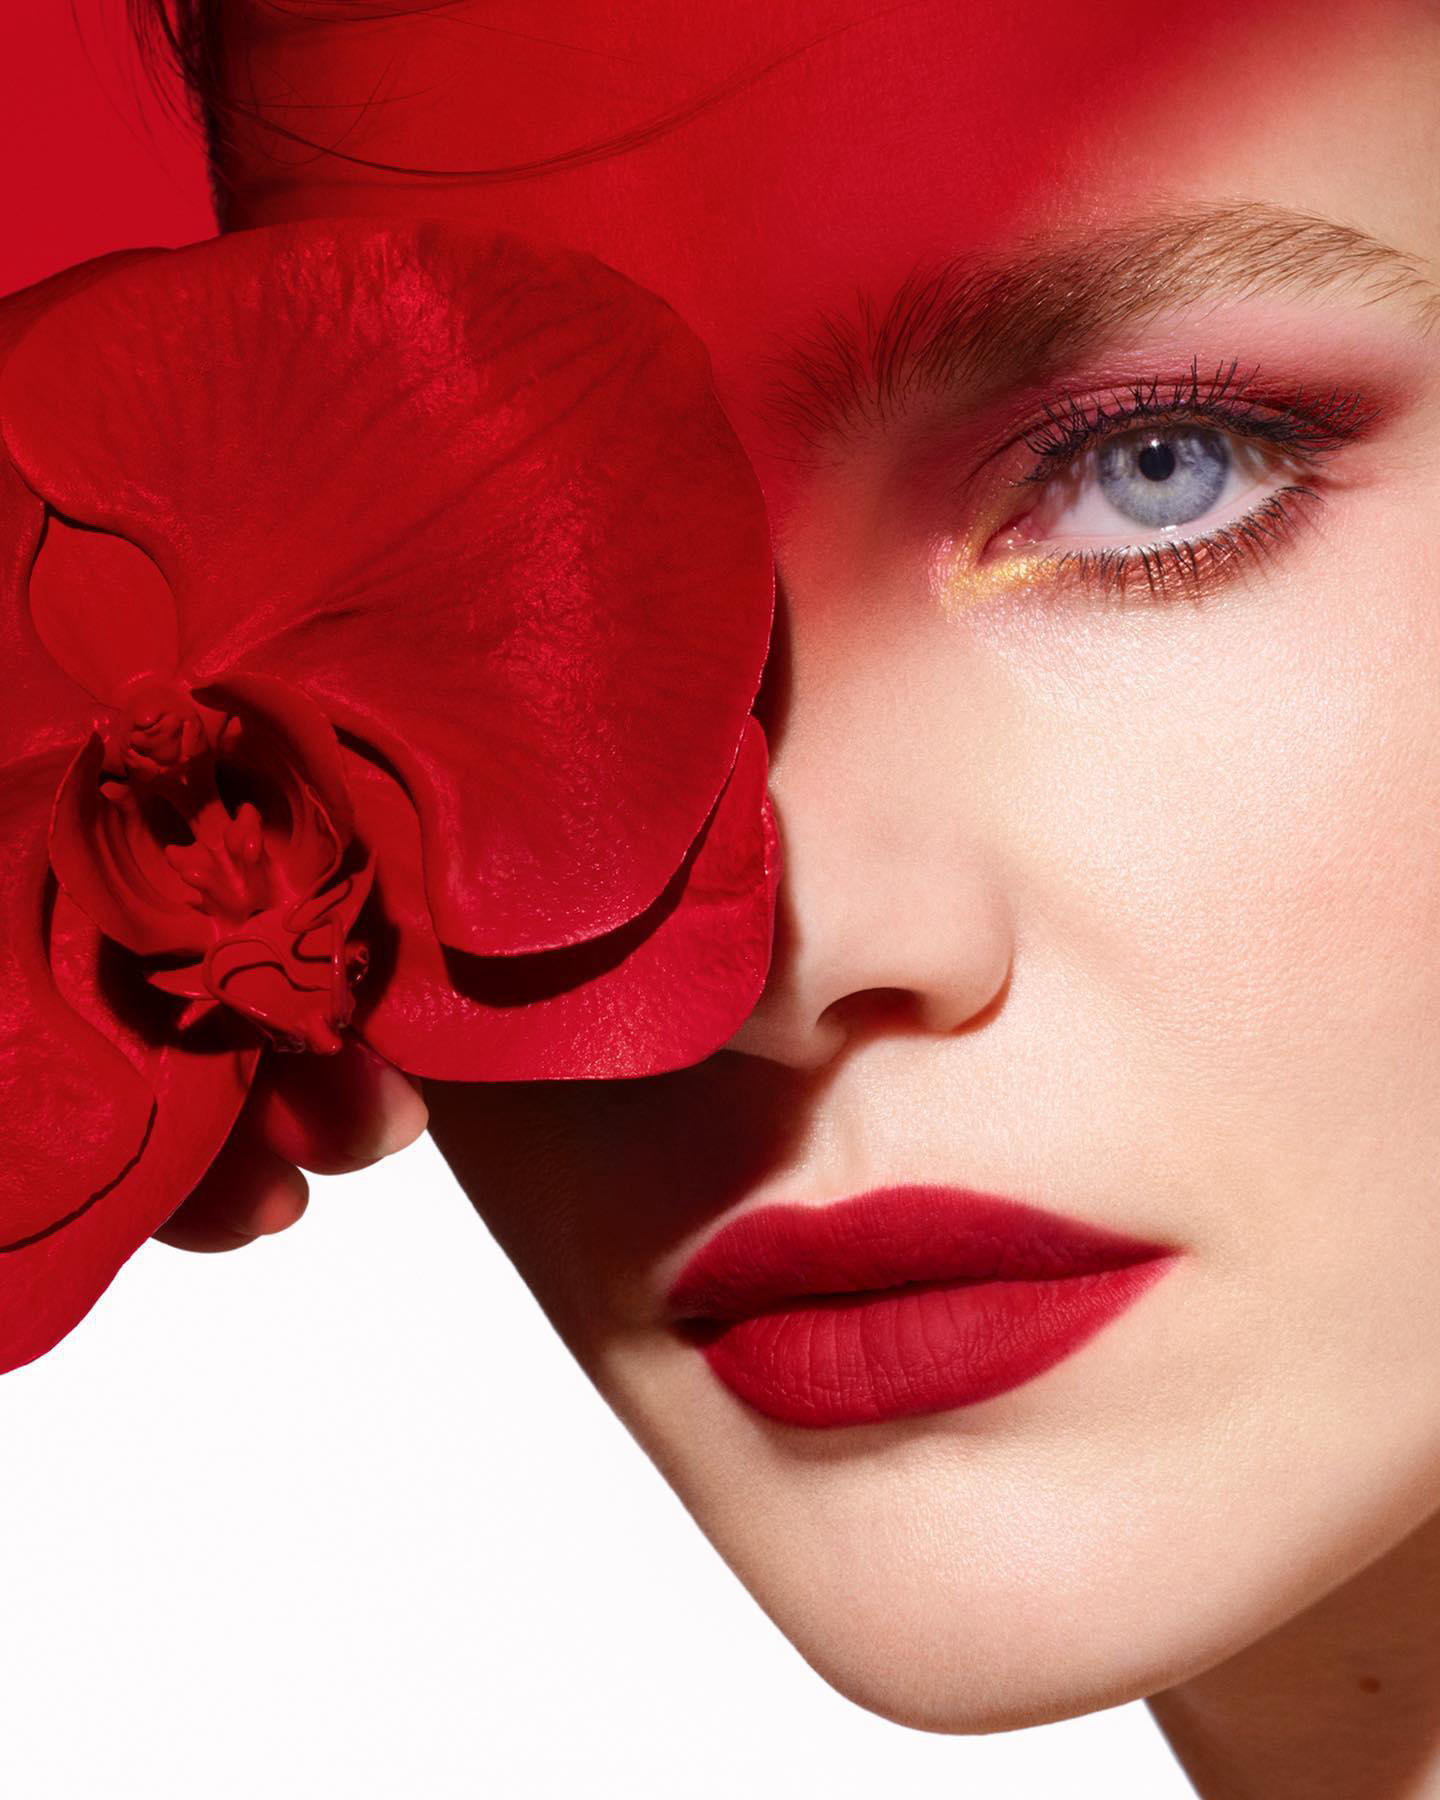 Guerlain - The muse of Guerlain's latest beauty collection, supermodel Natalia Vodianova blooms with